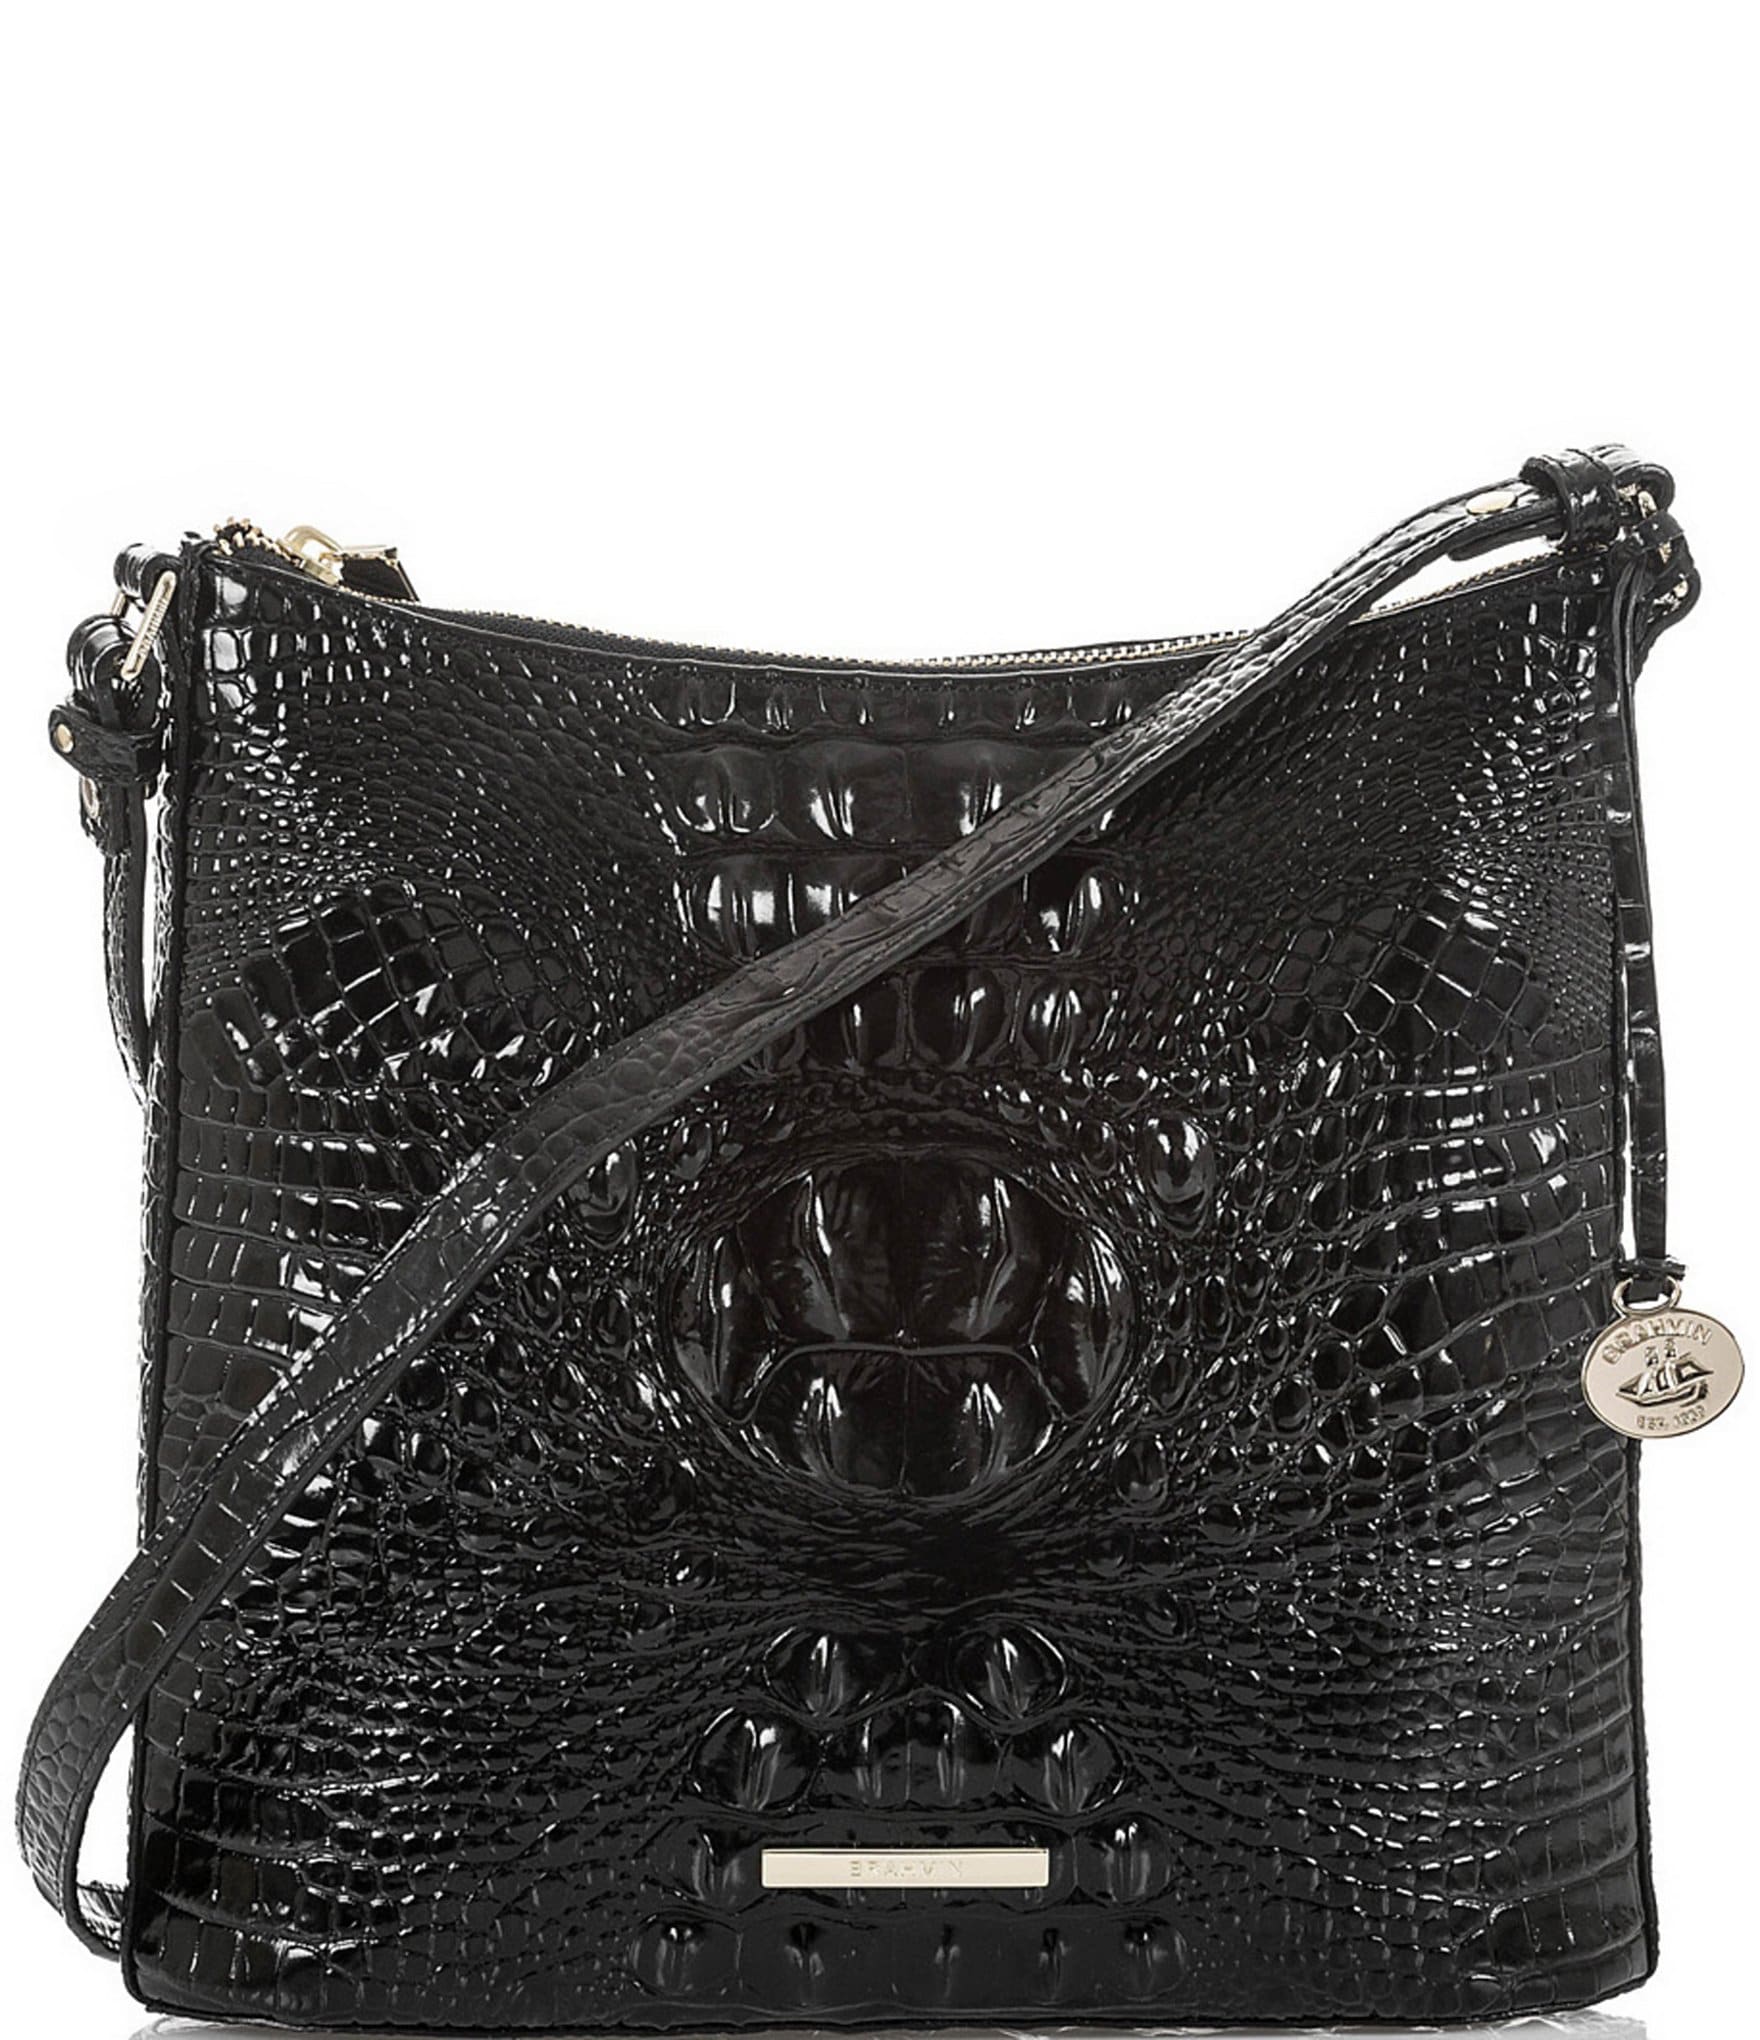 Brahmin Melbourne Collection Katie Crocodile-Embossed Crossbody Bag - Toasted Almond